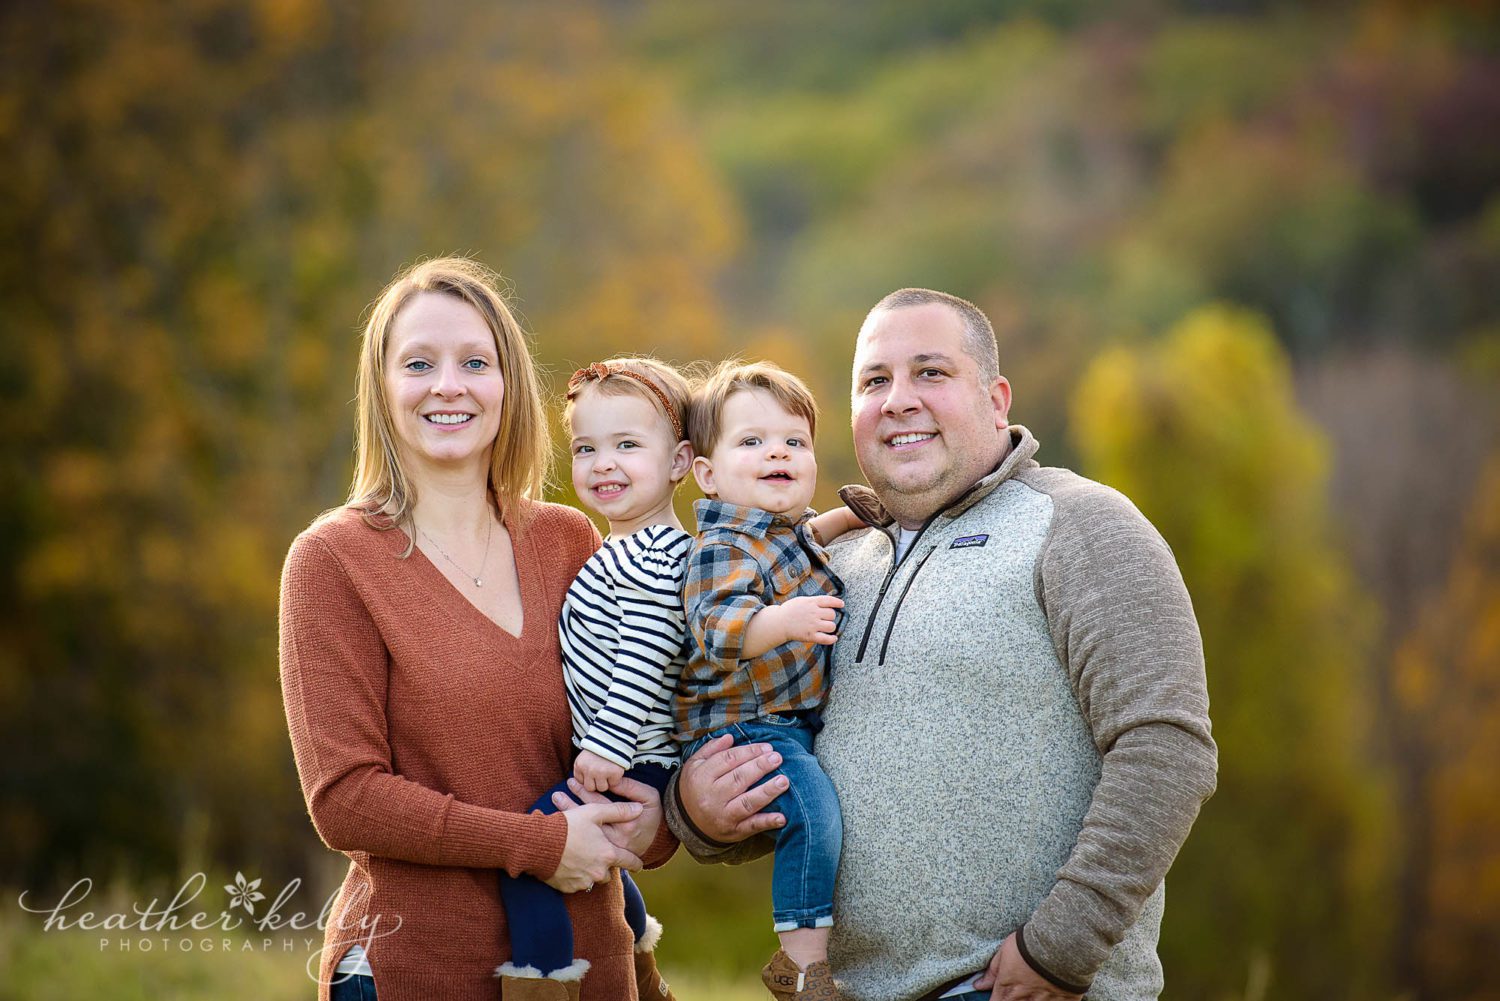 family photography session at aquila's nest vineyard